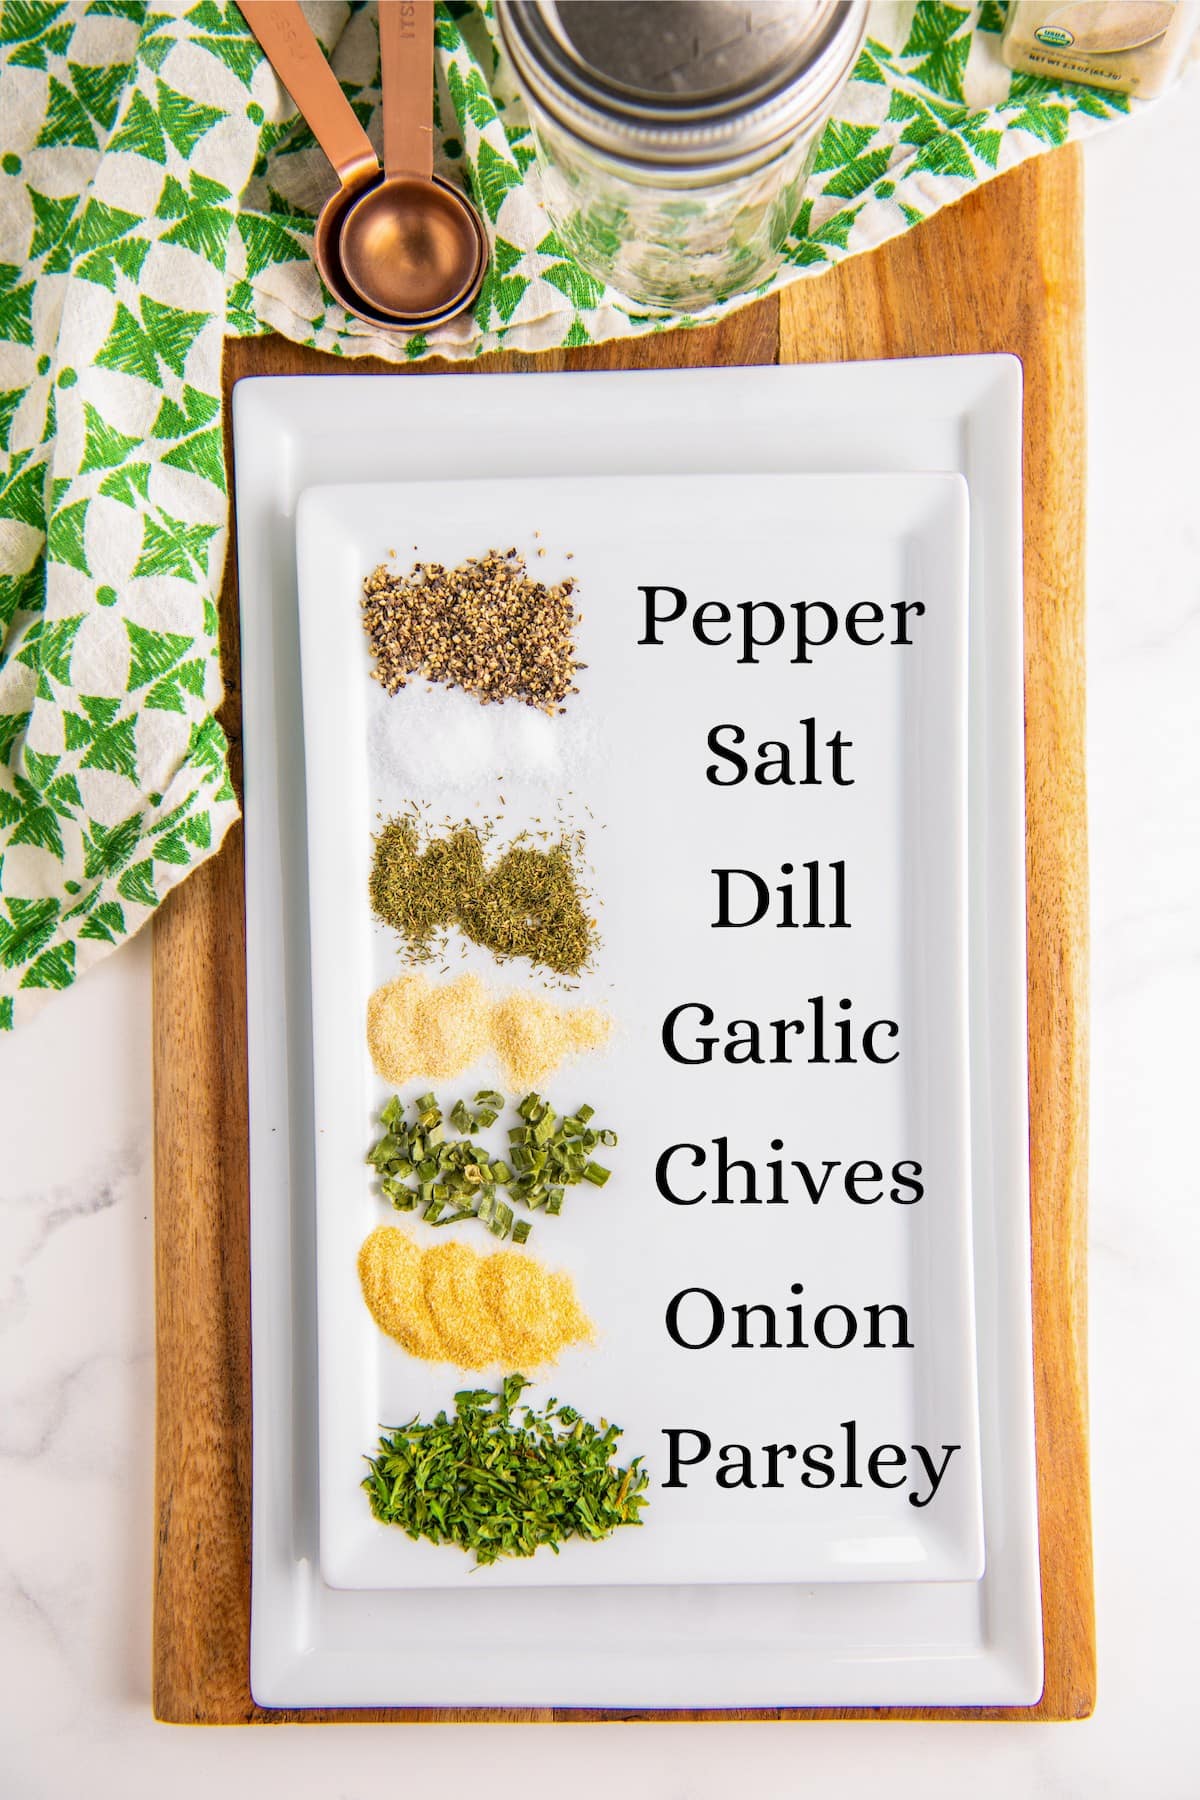 A plate with labeled piles of ingredients for ranch seasoning: pepper, salt, dill, garlic, chives, onion, and parsley.